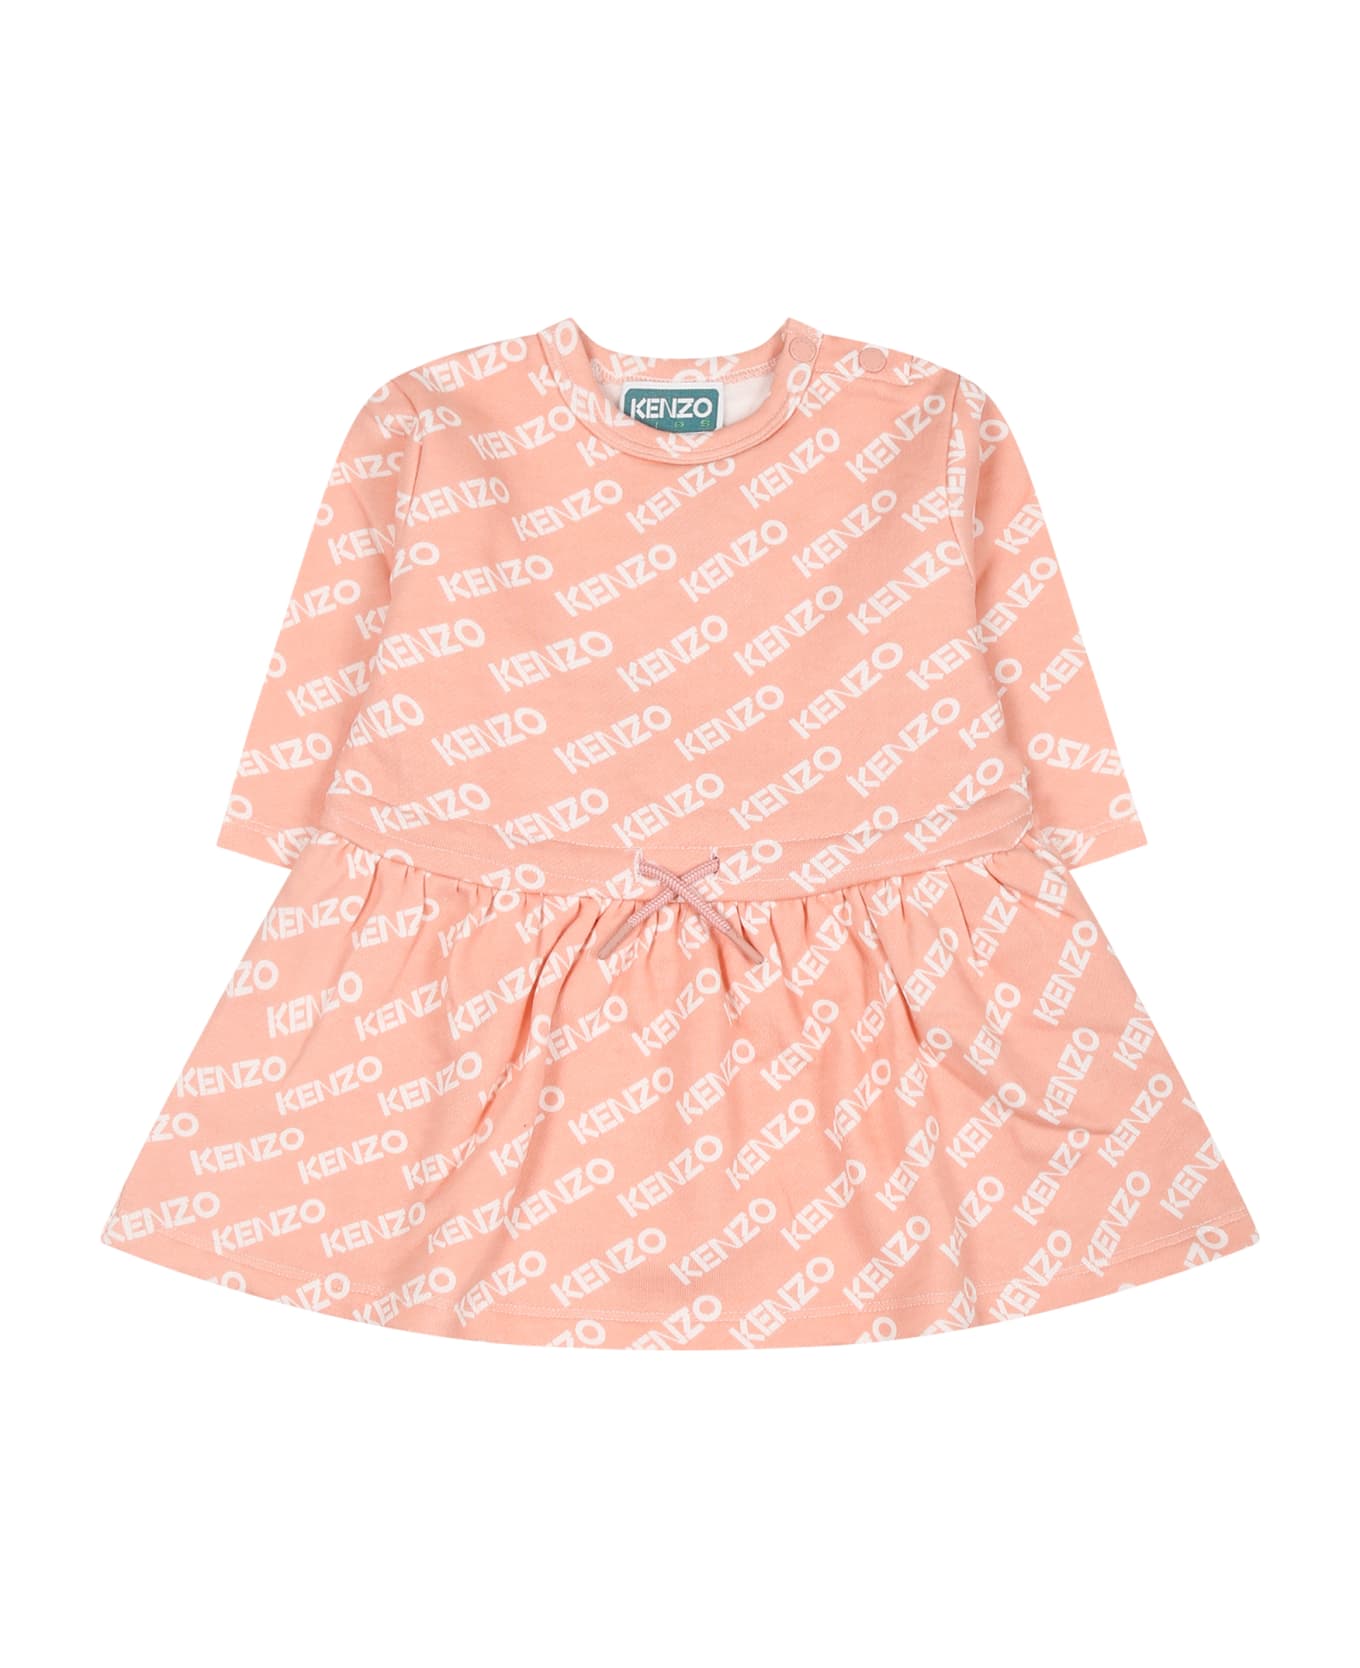 Kenzo Kids Pink Dress For Baby Girl With Logo - Pink ウェア